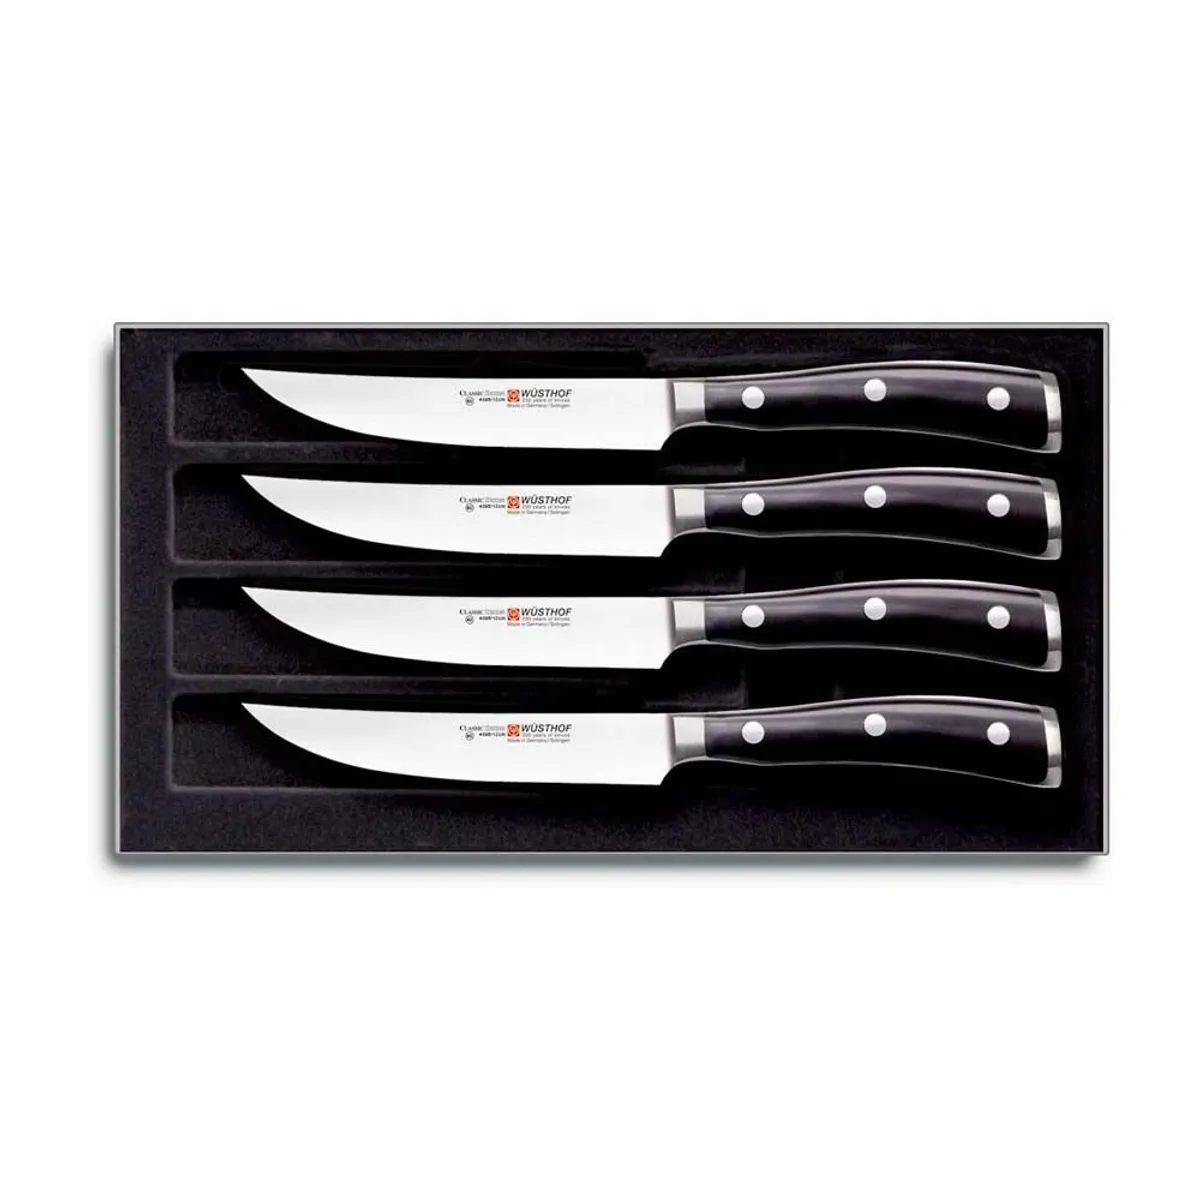 WÜSTHOF 9716 CLASSIC IKON Precision Forged High-Carbon StainlessSteel